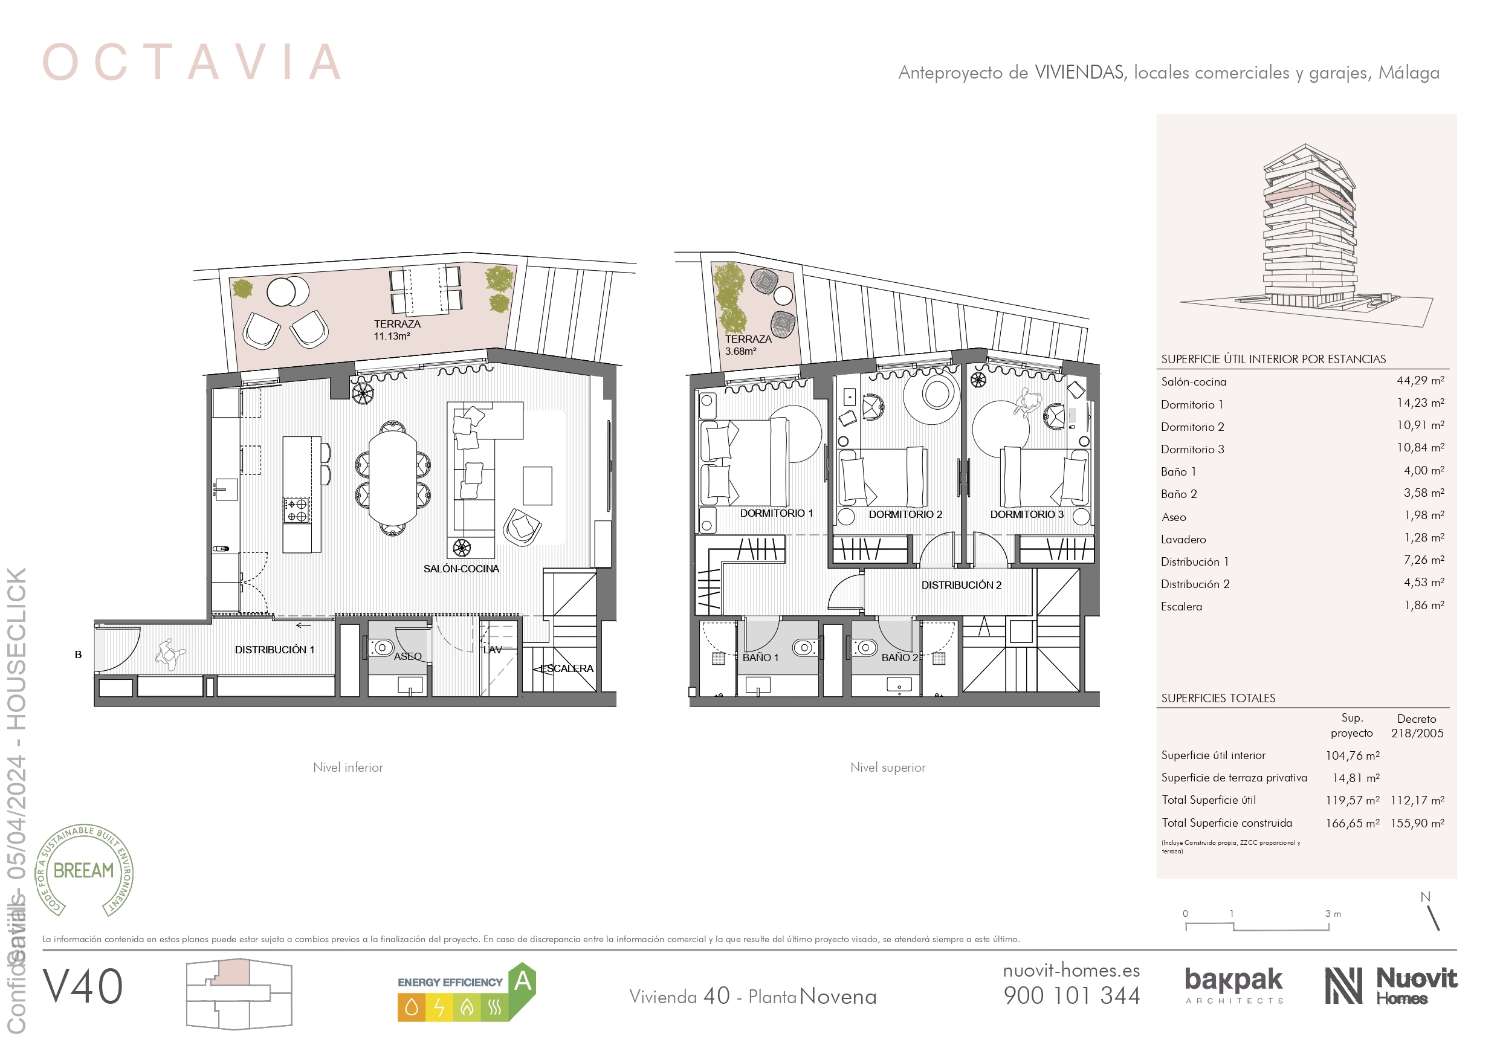 BRAND NEW 3 BEDROOM LUXURY HOMES WITH SEA VIEWS LAST 4 UNITS! From €2,250,000